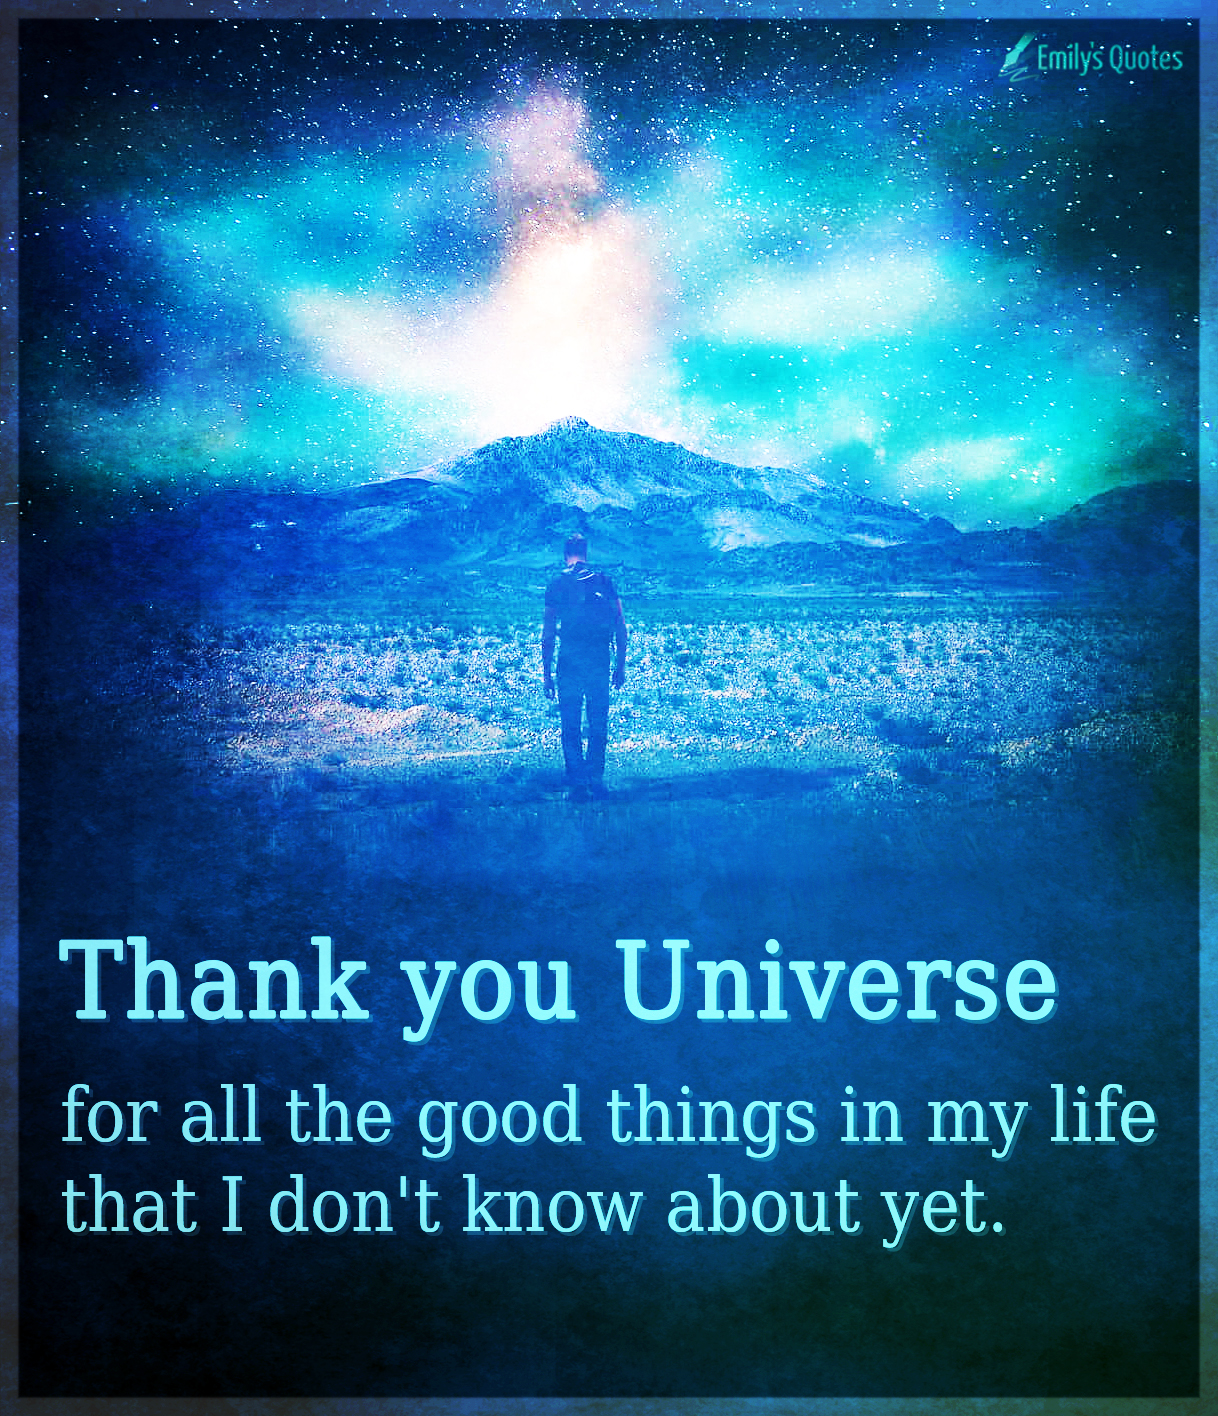 Thank you Universe for all the good things in my life that I don’t know about yet